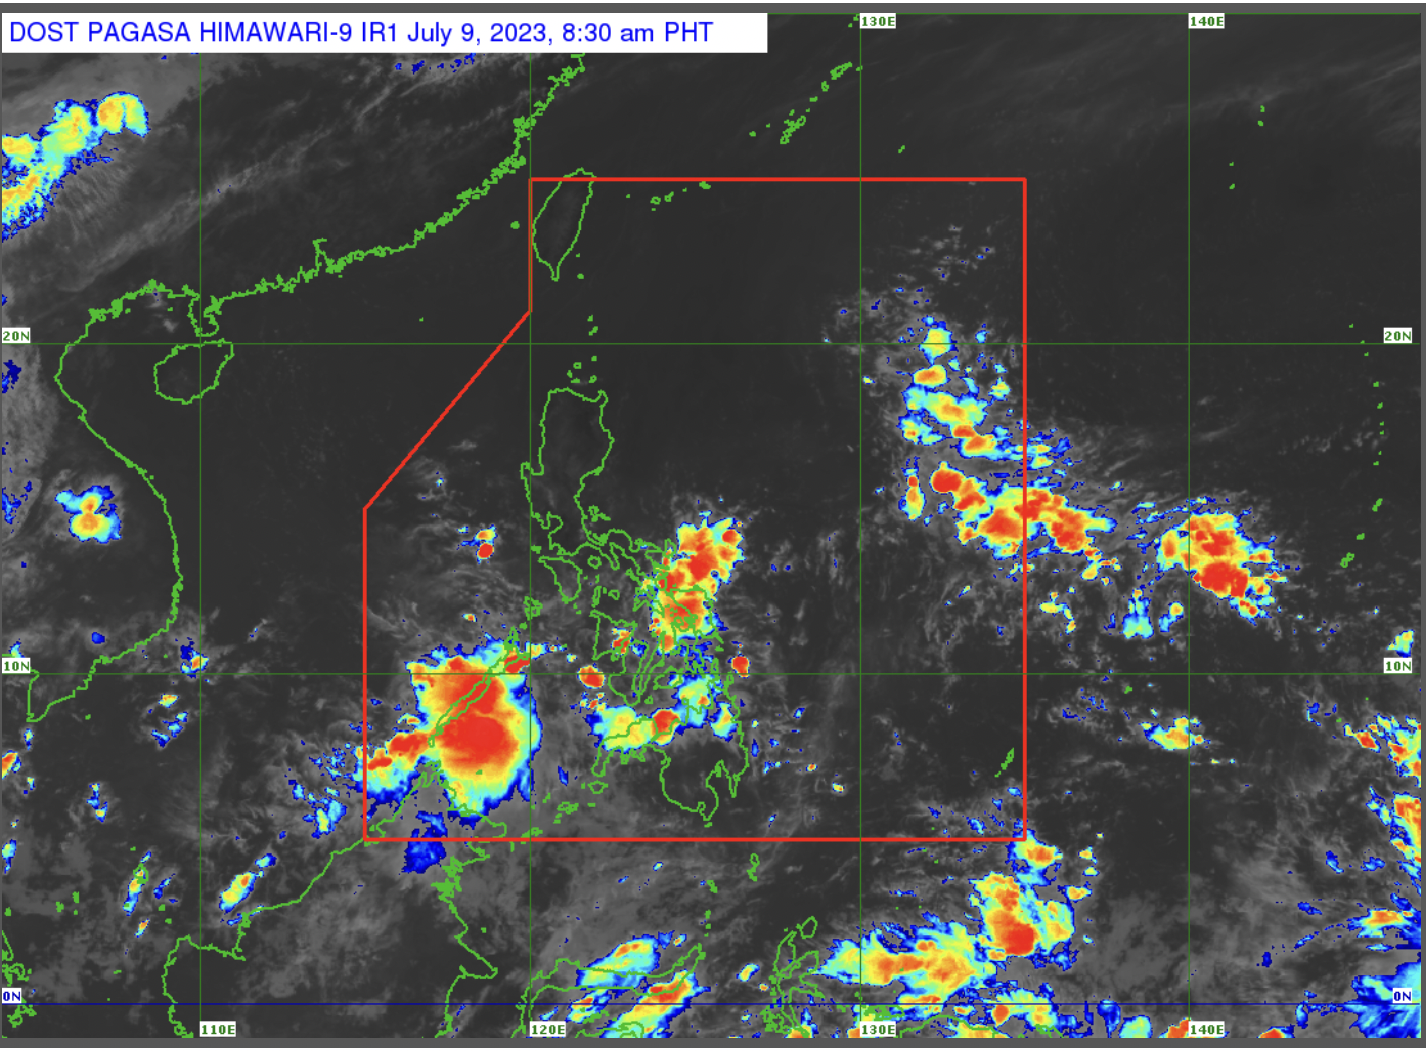 Generally fair weather with chances of rain in PH due to easterlies, ITCZ